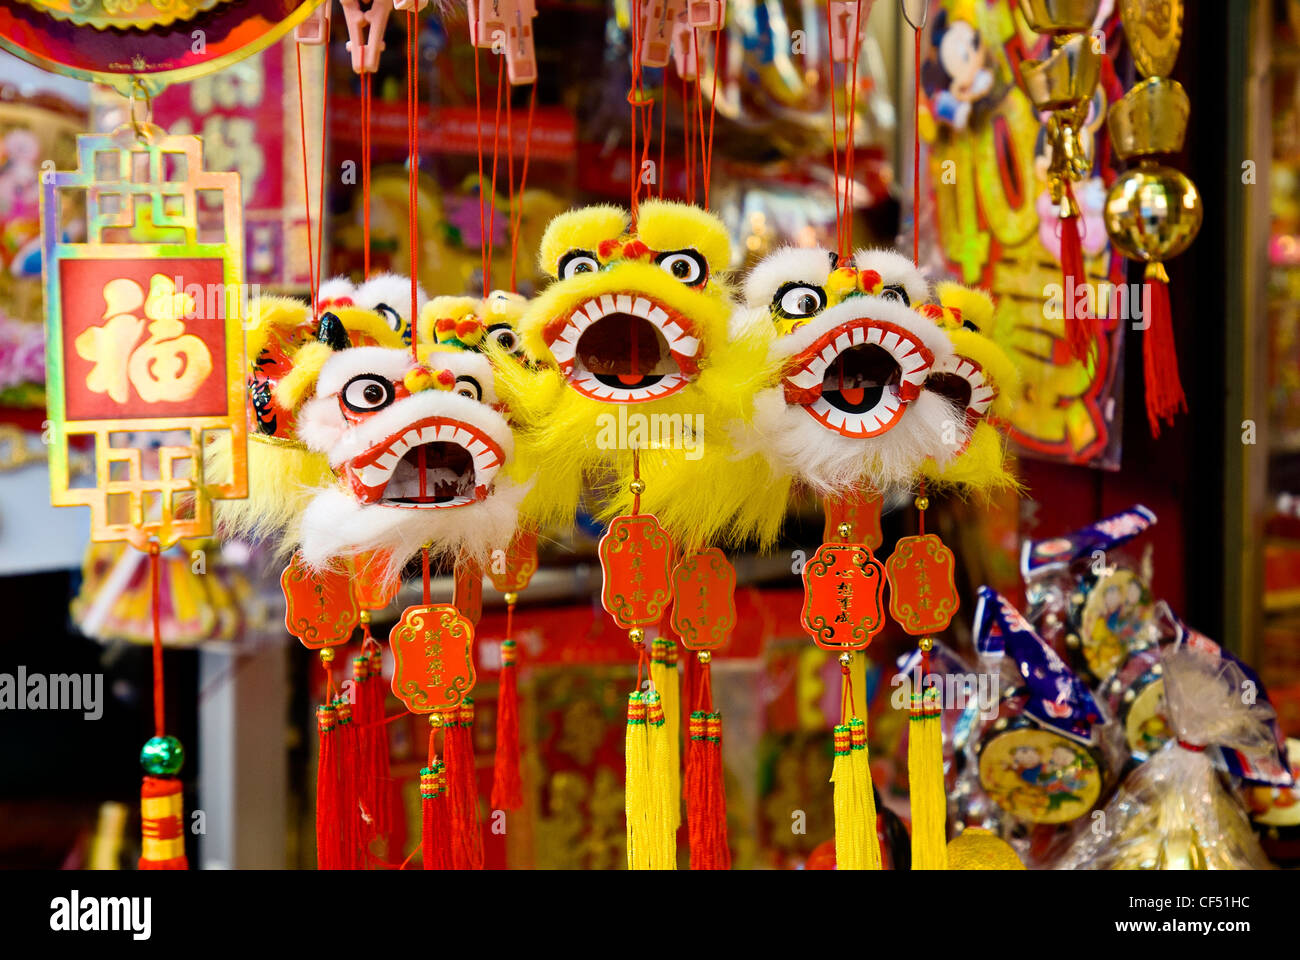 Souvenir shop in Chinatown, New York City, sells Chinese puppets. Stock Photo